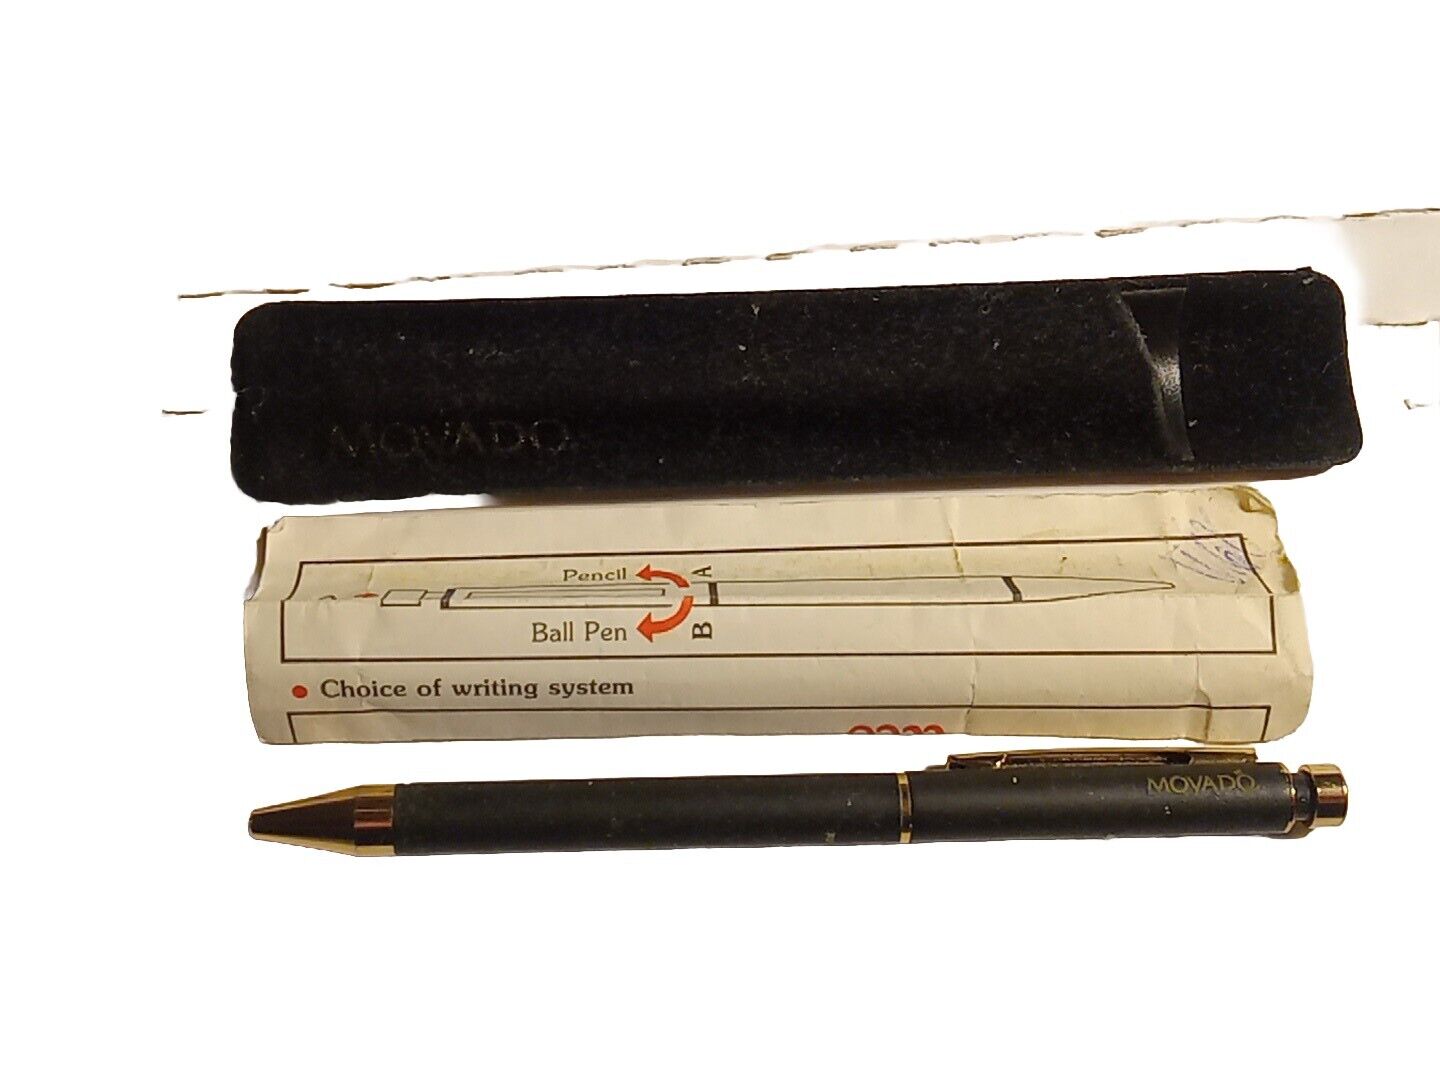 VINTAGE MOVADO CHOICE OF WRITING SYSTEMS PEN/PENCIL.